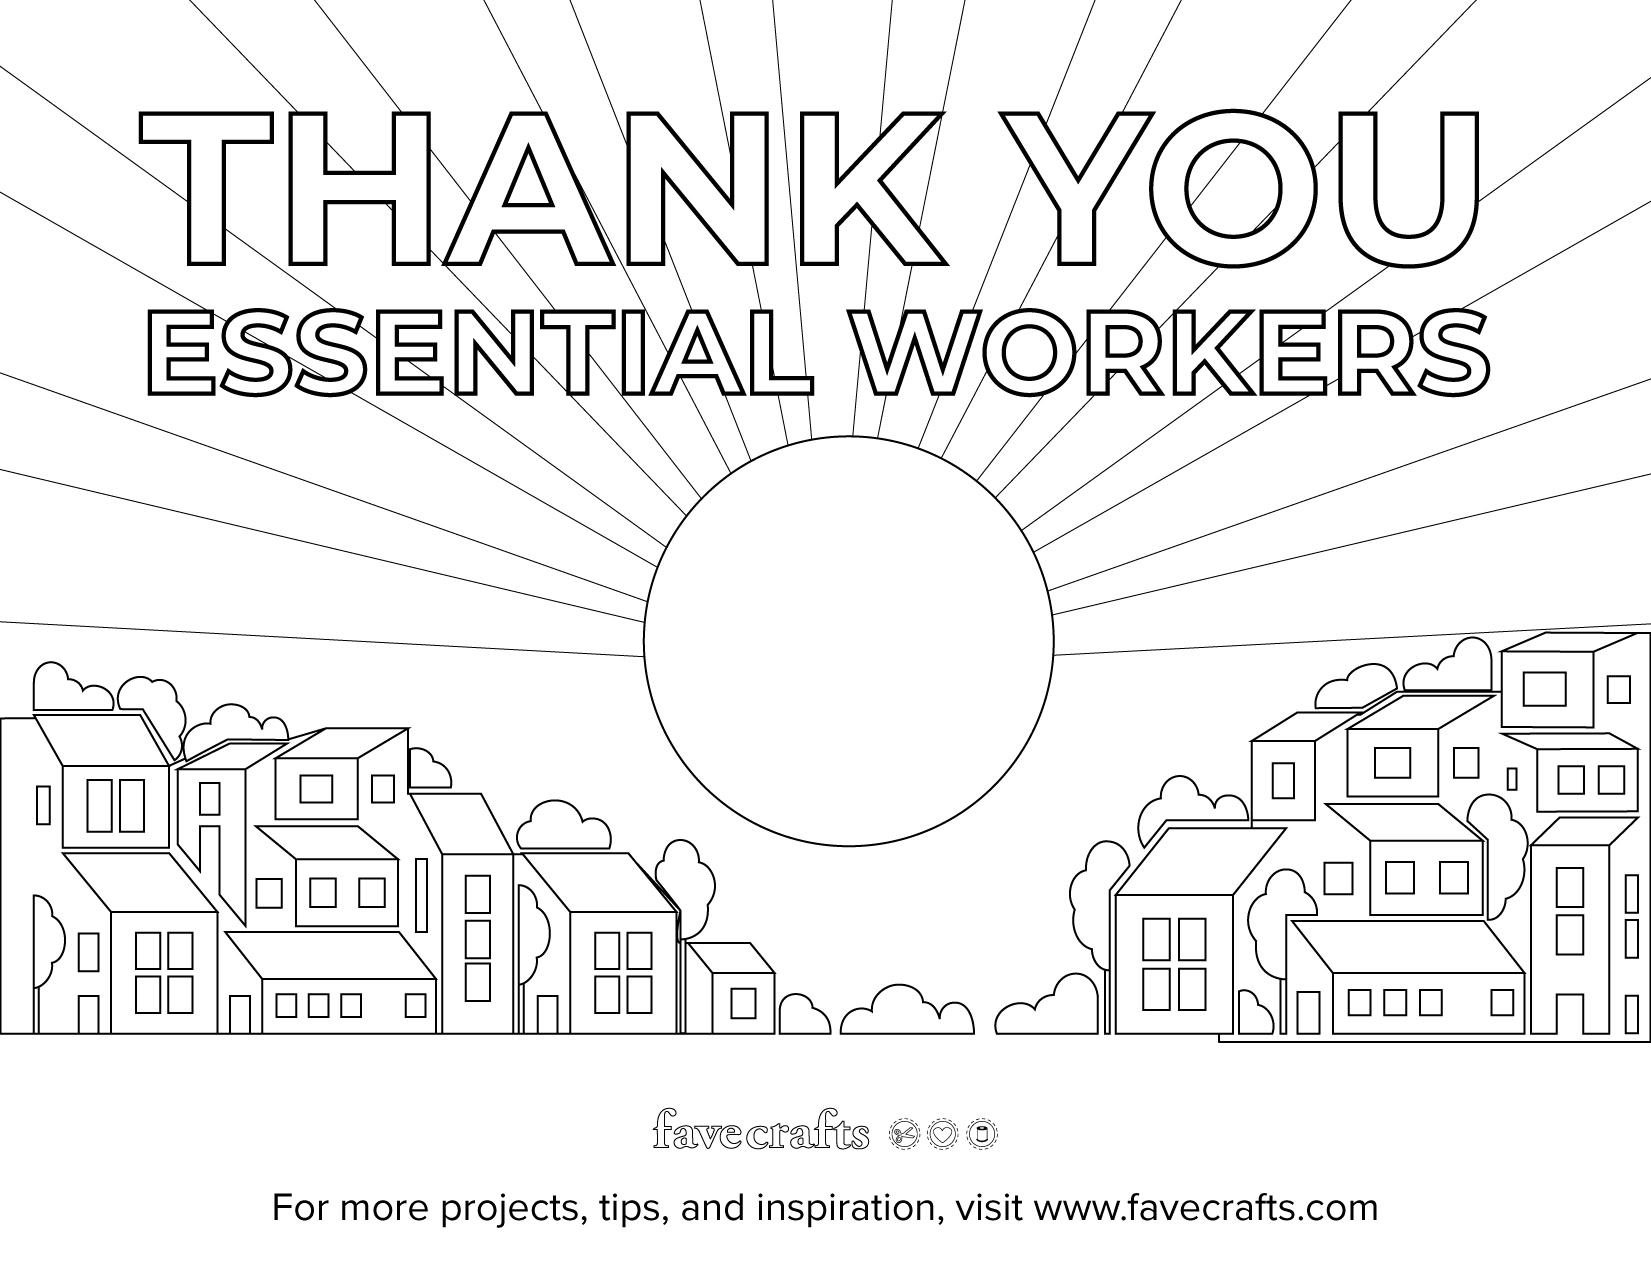 Thank You Essential Workers Sign   FaveCrafts.com